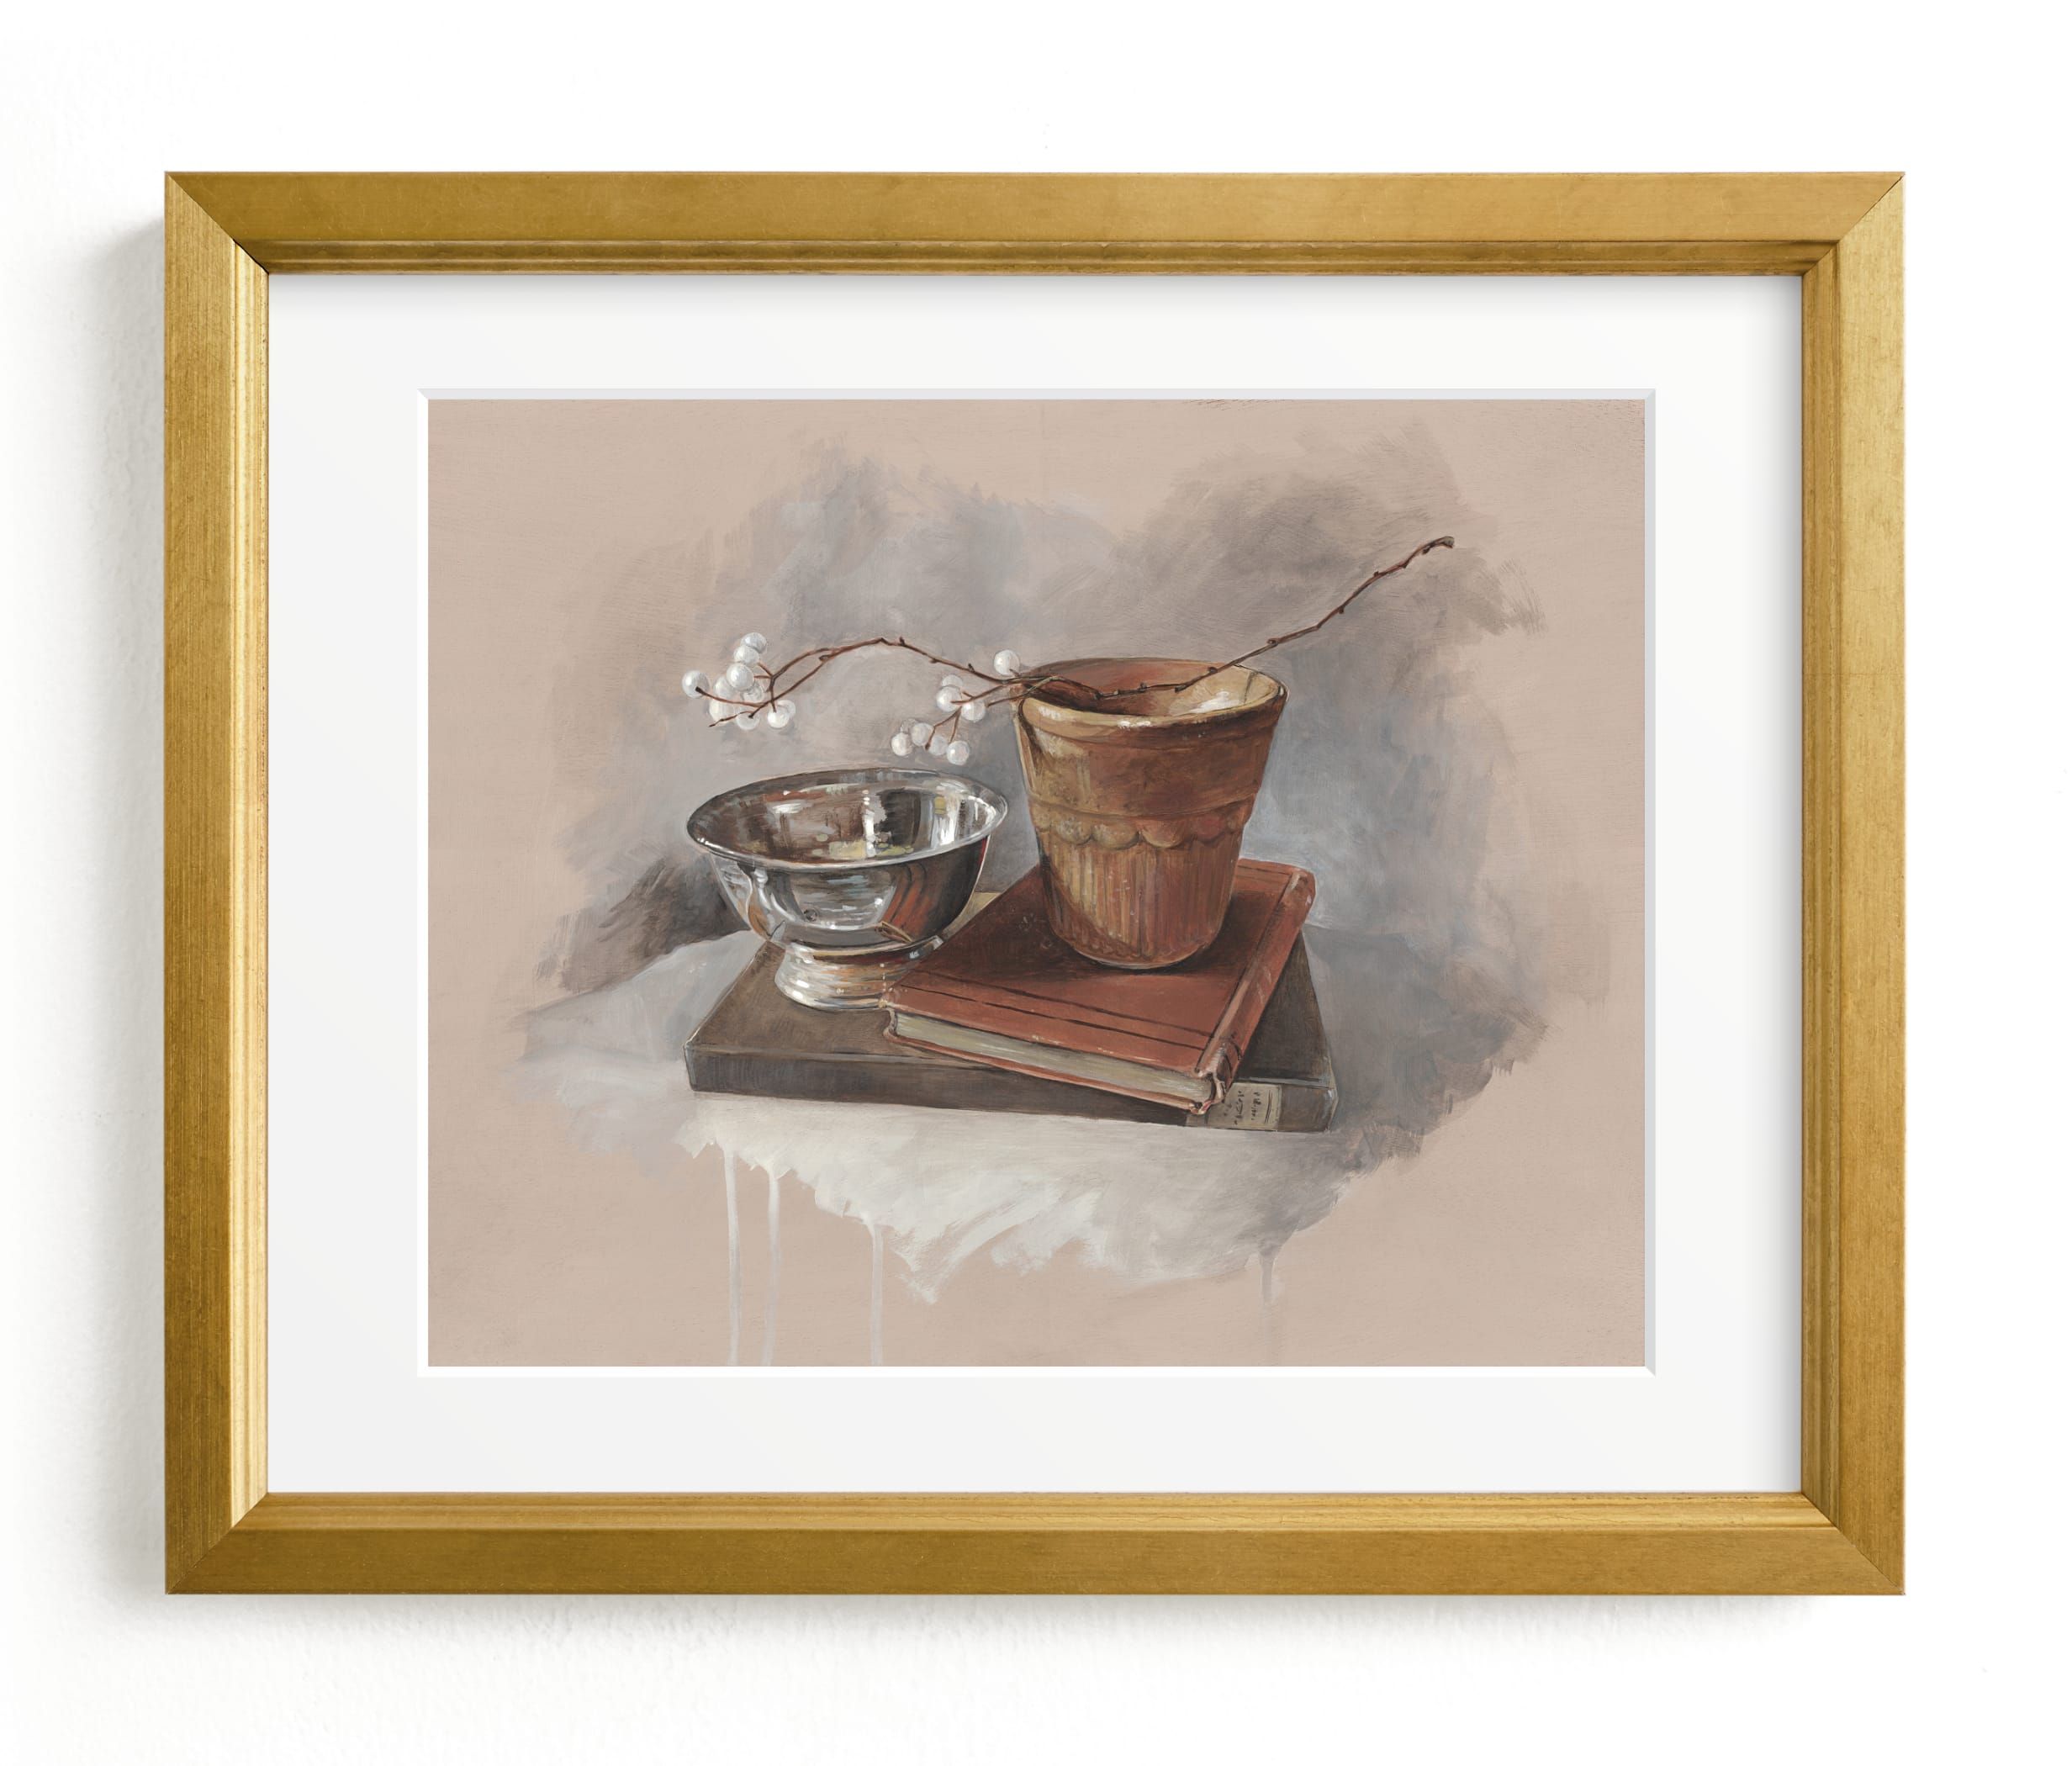 "Tallow Berries" - Painting Limited Edition Art Print by Lorent and Leif. | Minted